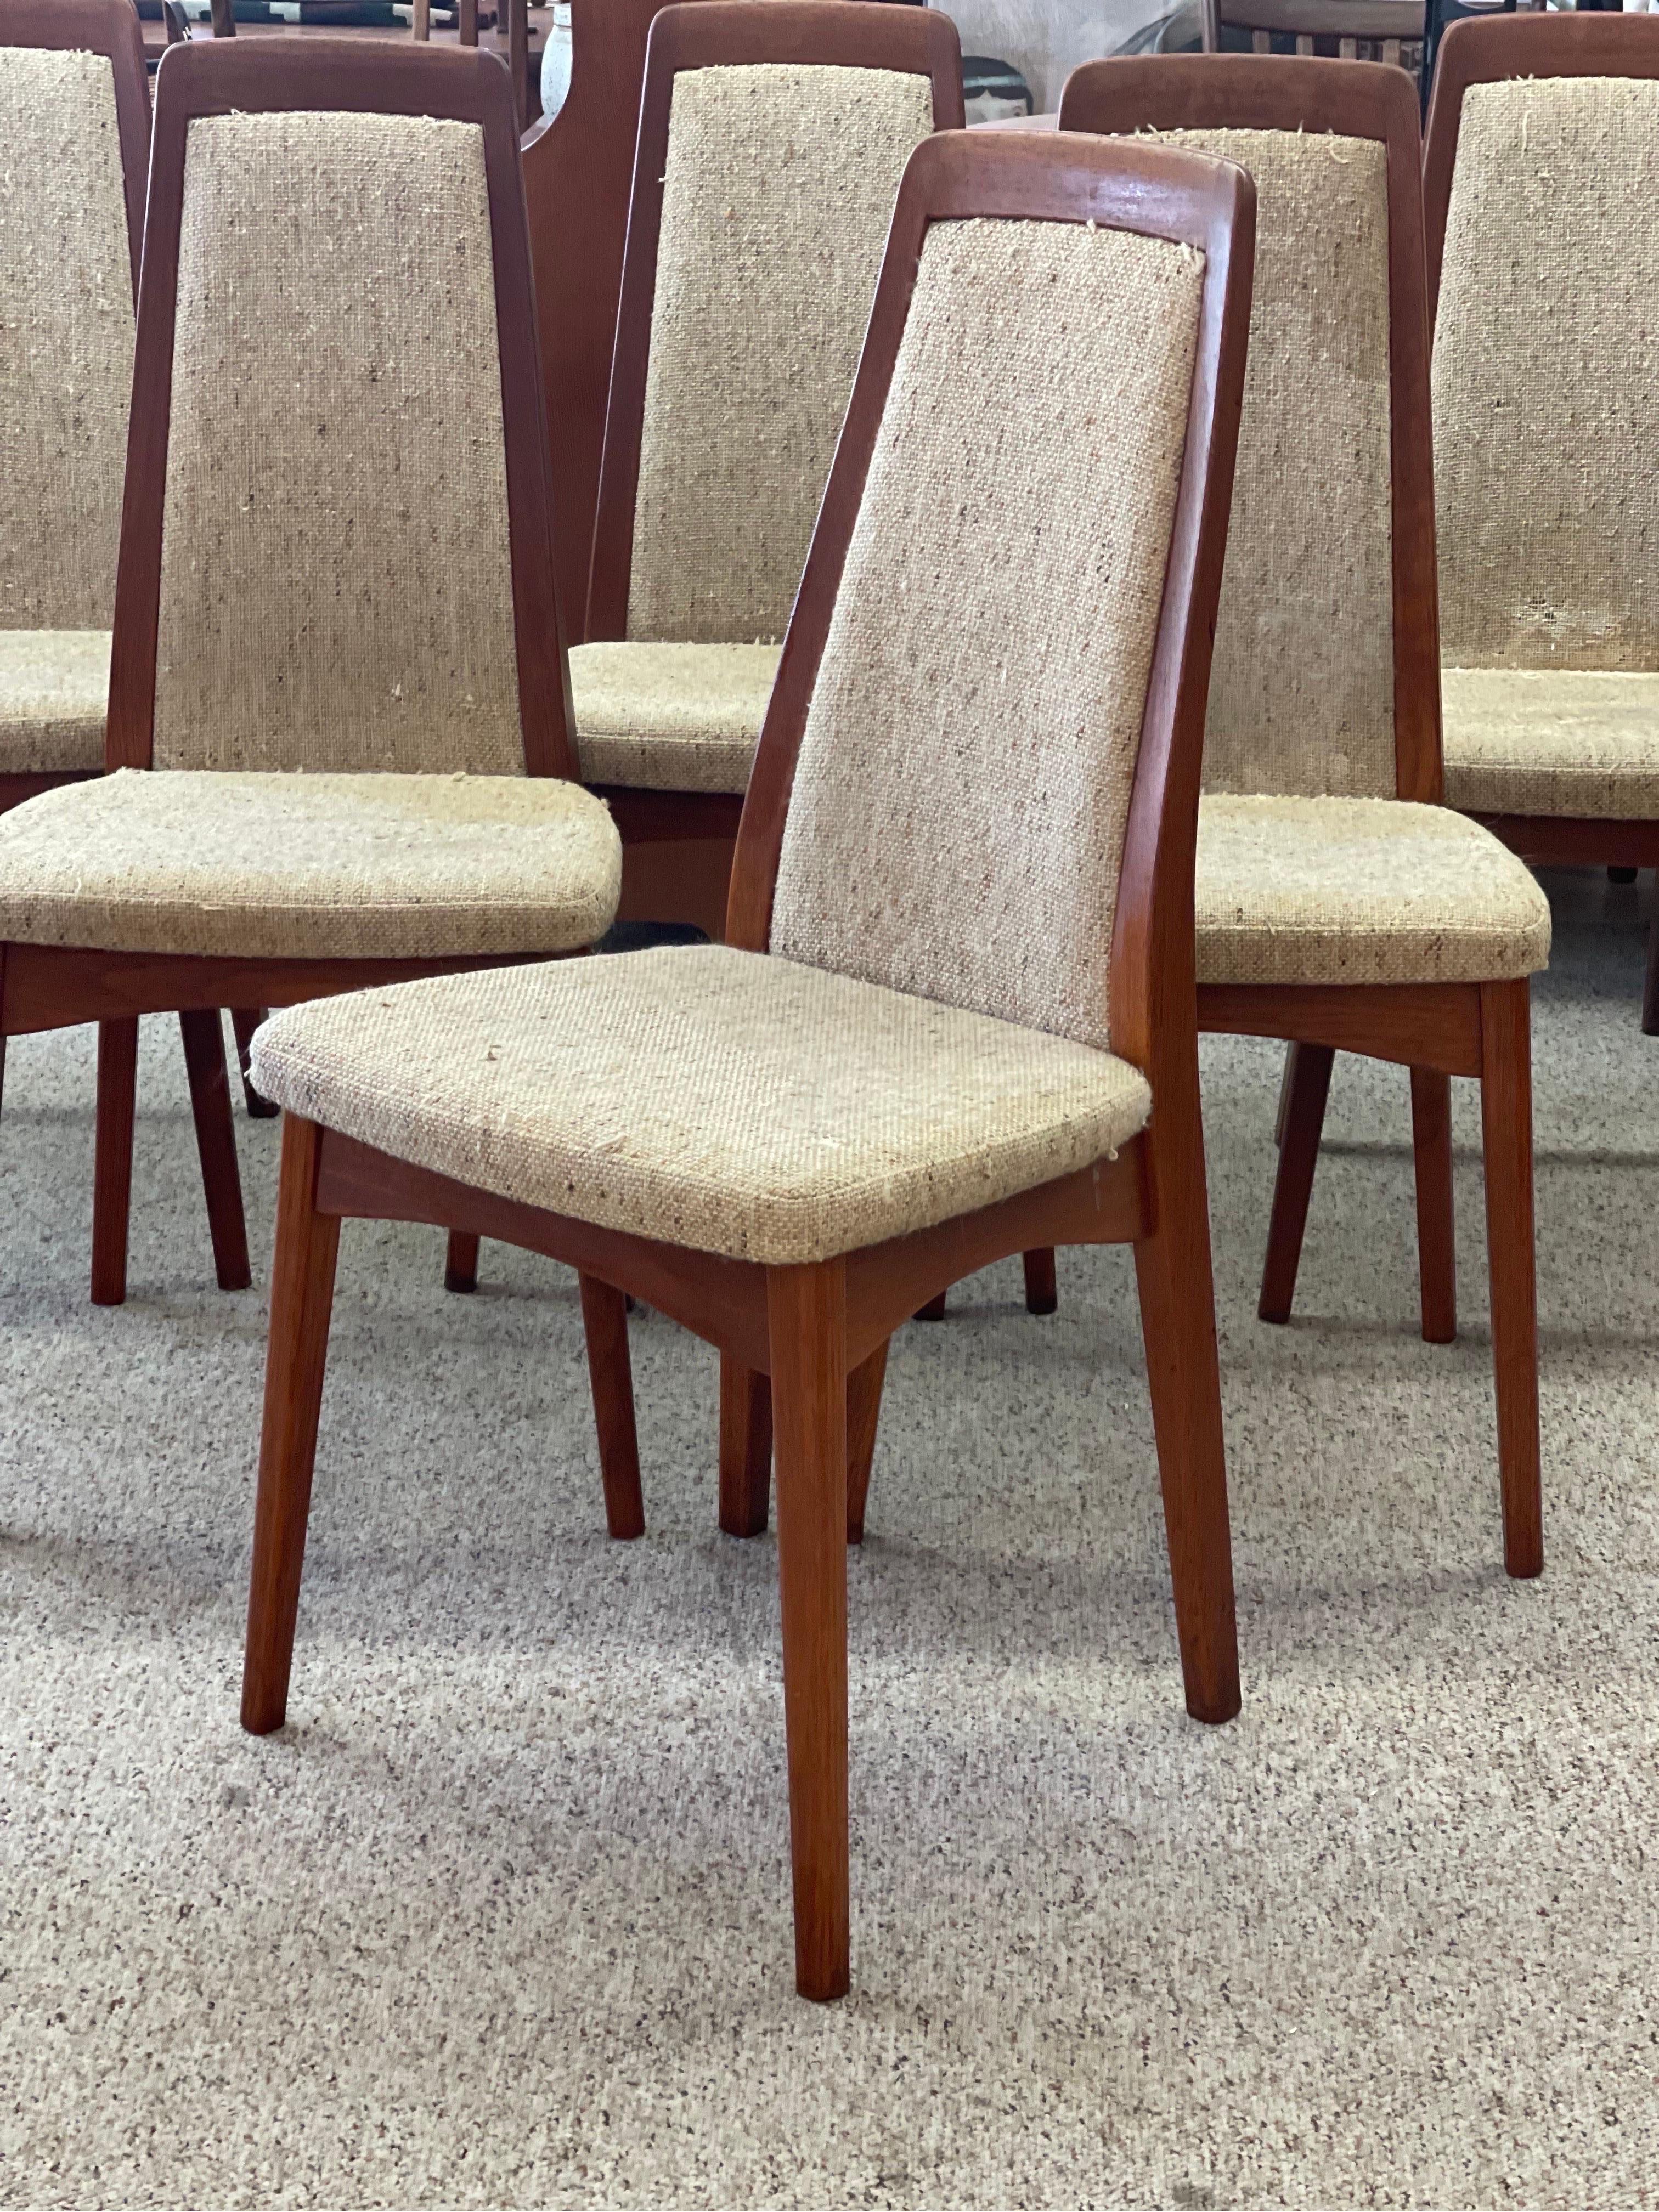 Danish Modern Dining Chairs with Designers Stamp

Chairs Priced as - is. Reupholstery may be Required 

Dimensions. 18 W ; 18 D ; 38 H
Seat Height. 19.